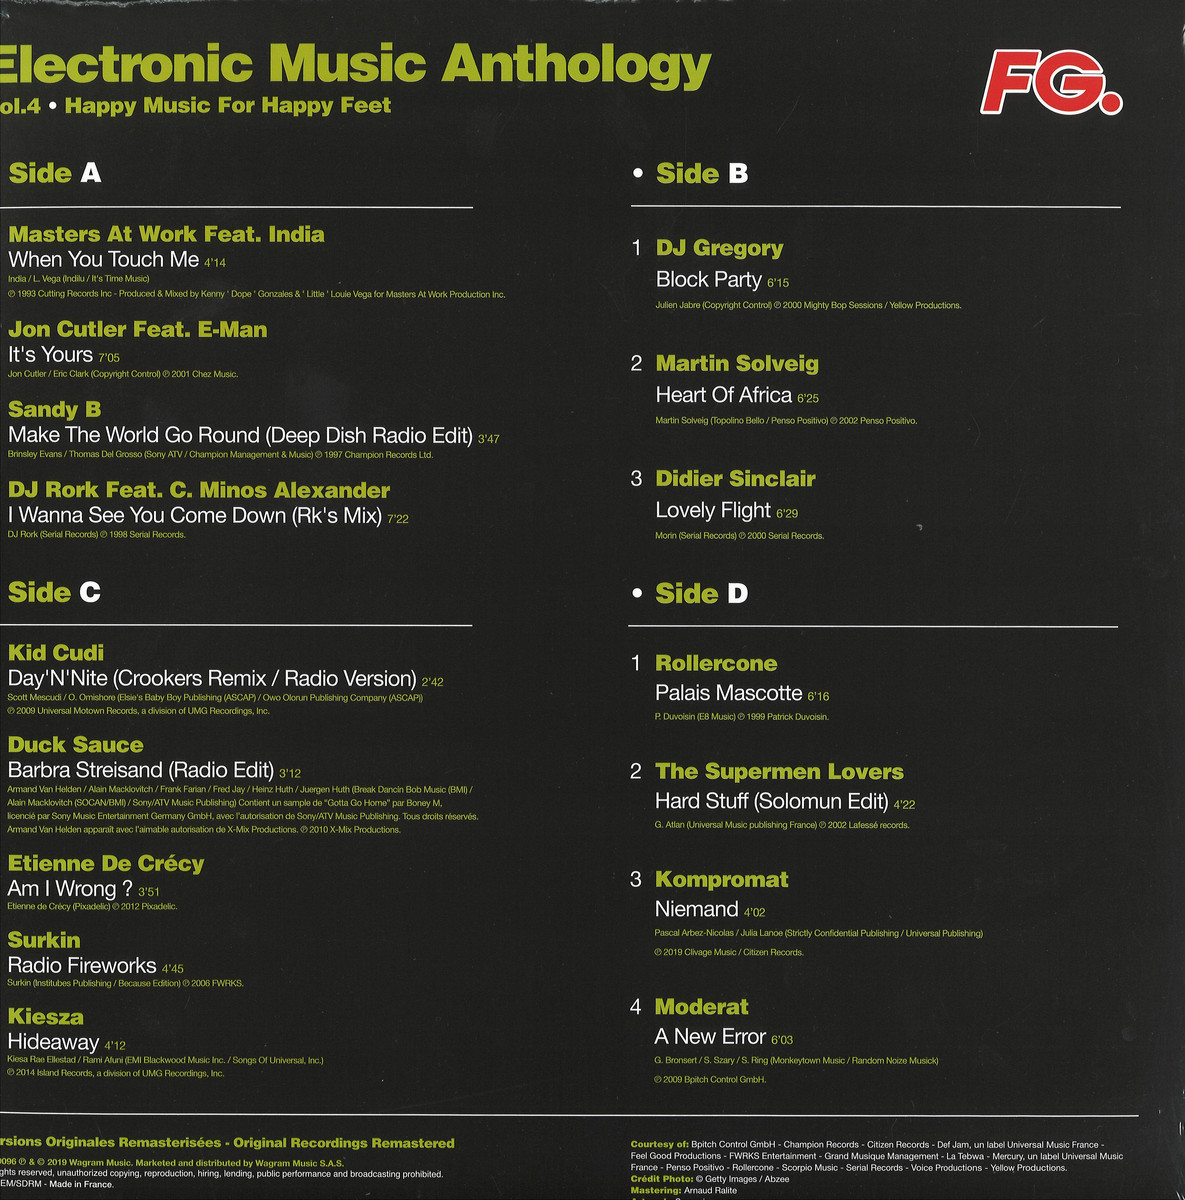 Various - Electronic Music Anthology by FG Vol. 4 / Wagram 3384266 - Vinyl